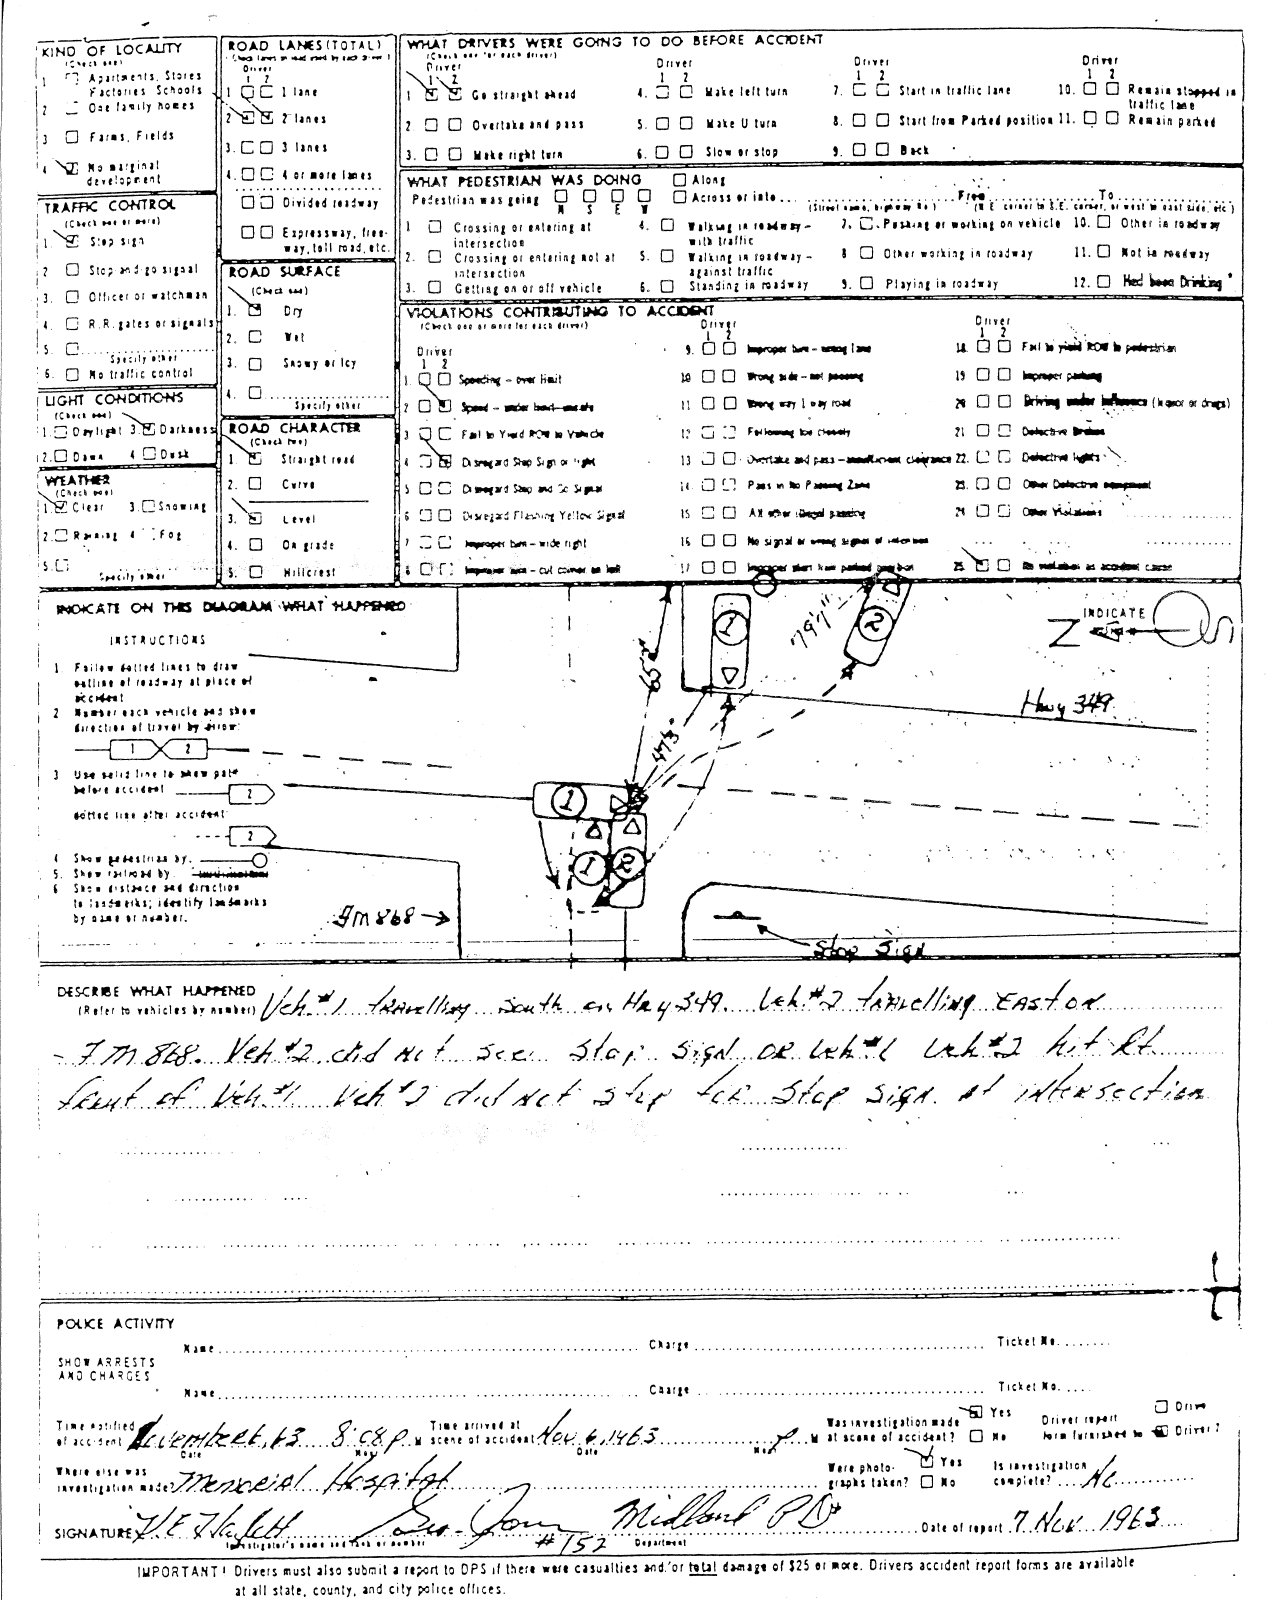 How To Make A Fake Accident Report Fill Online, Printable 